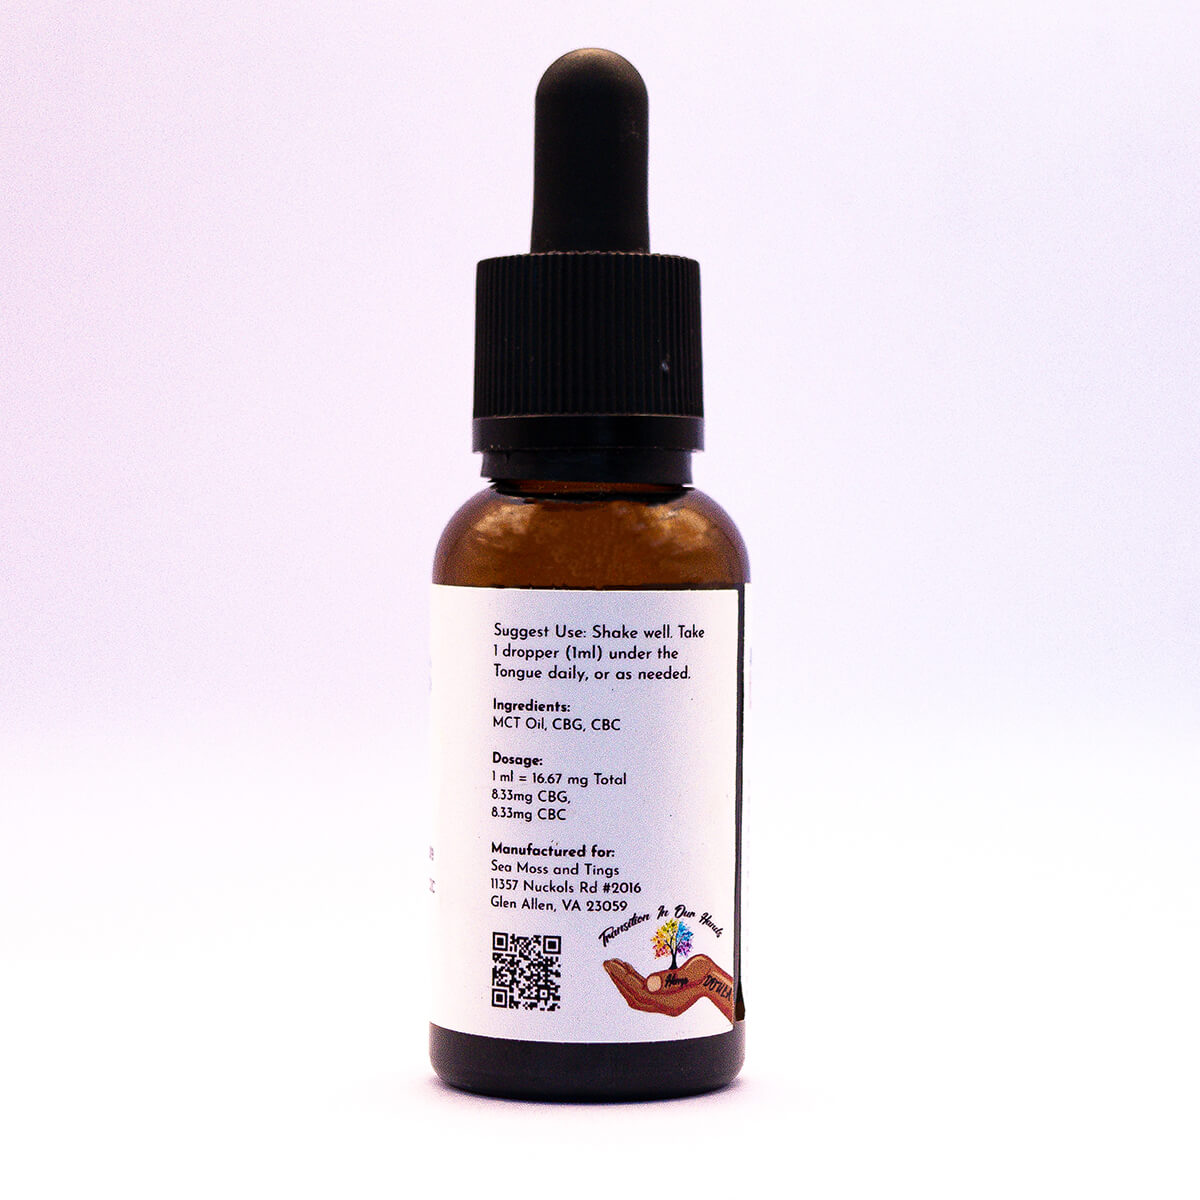 Focus Drops Dosage - Sea Moss and Tings